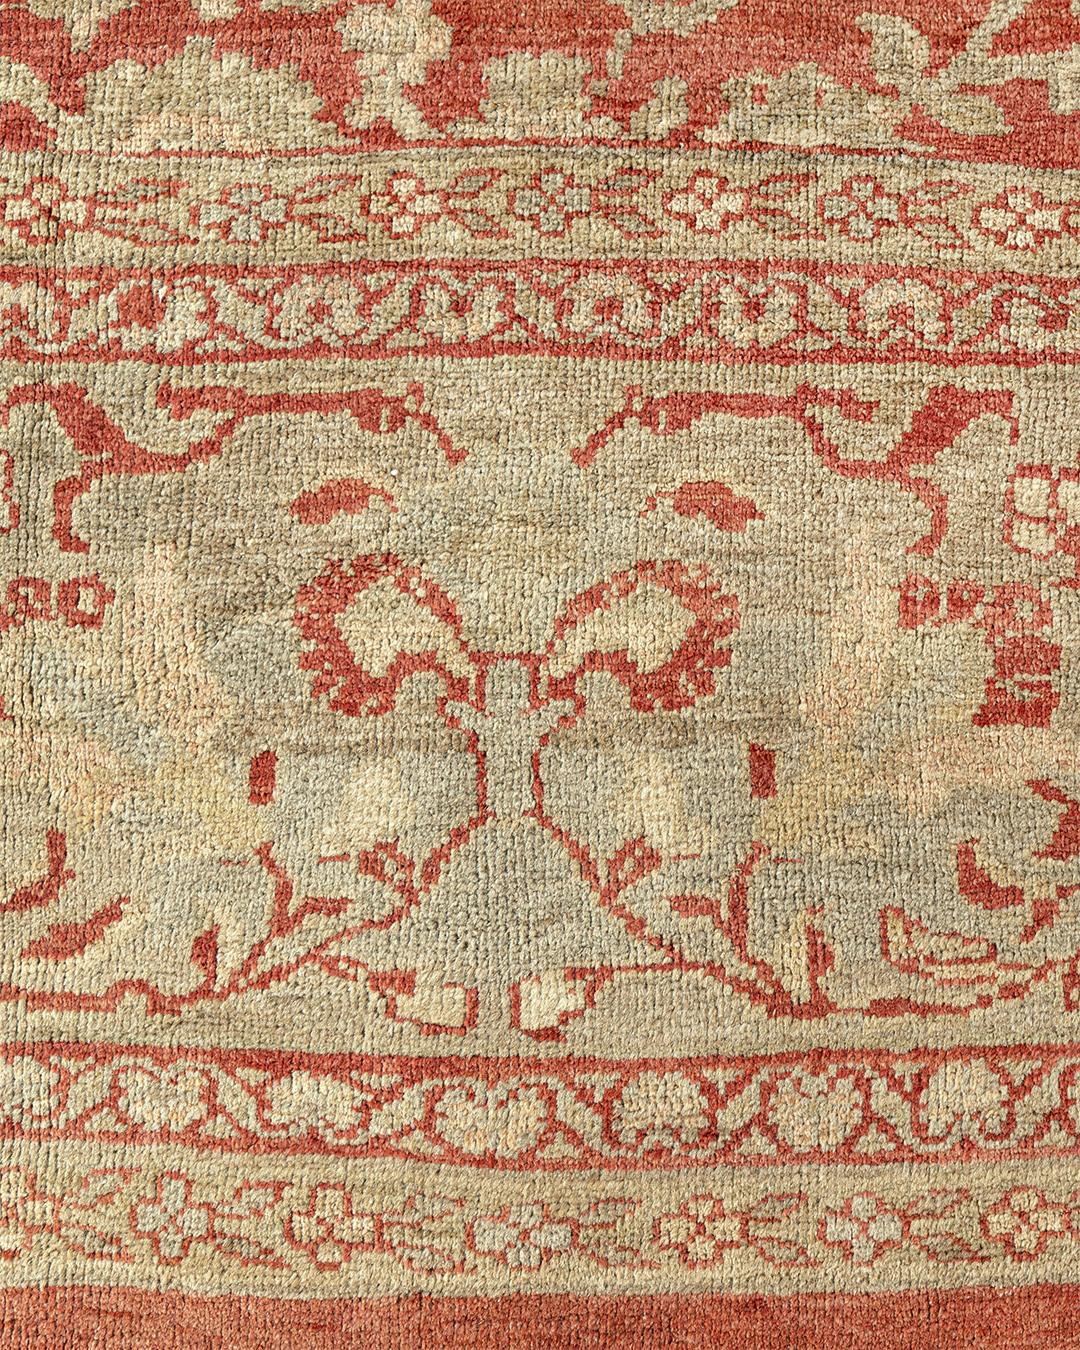 Antique oversize Persian terracotta Sultanabad rug, circa 1880. Size 17'6 x 23'9. This is a village carpet? Well, a rather large one, not your usual scatter 4 x 6 or room size 9 x 12. Sultanabad carpets were woven in the Arak/Markazi province,